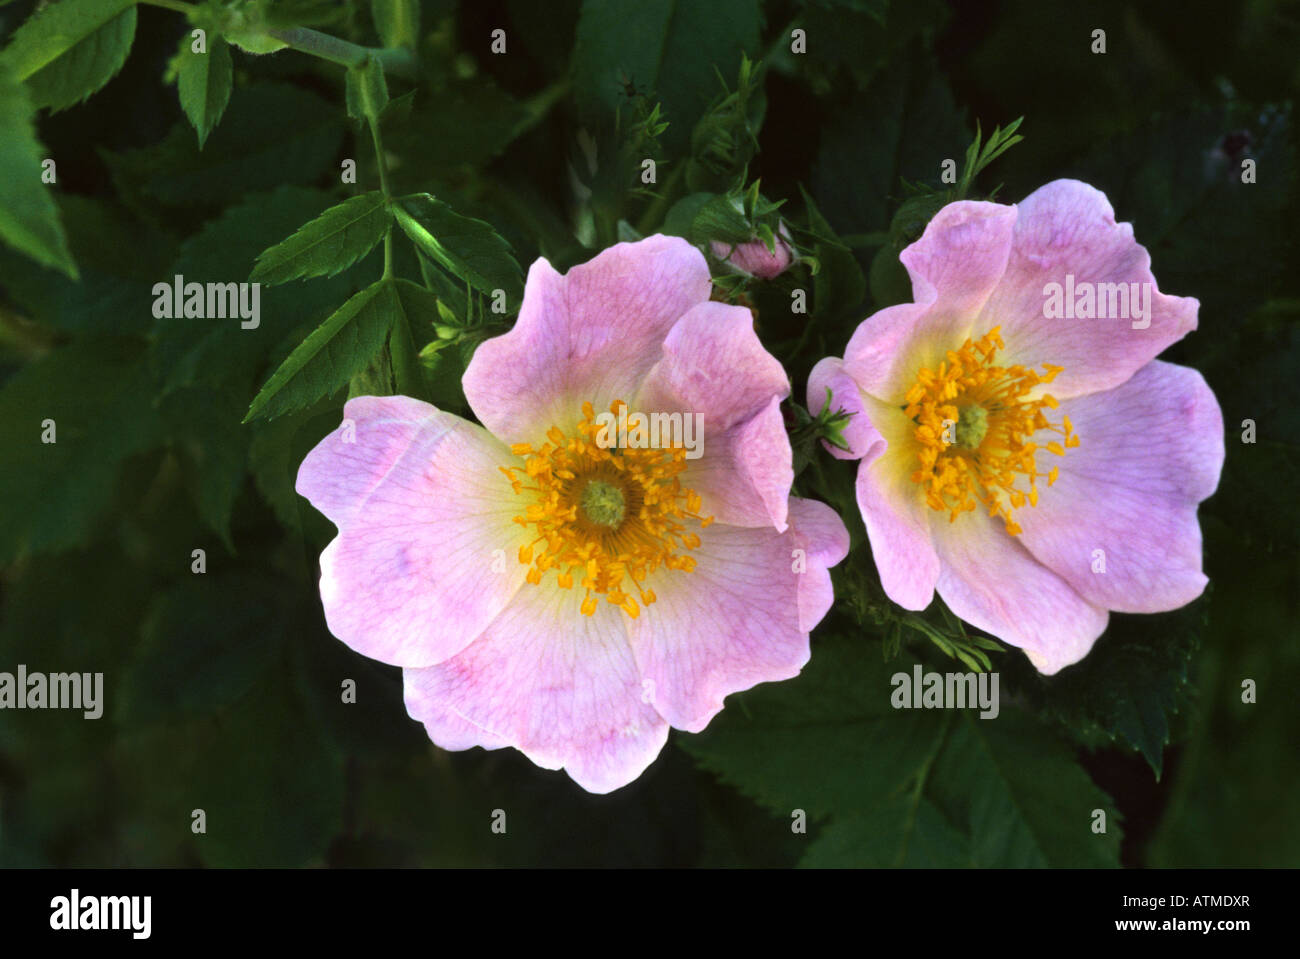 Rosa Canina - Wild rose rose Banque D'Images